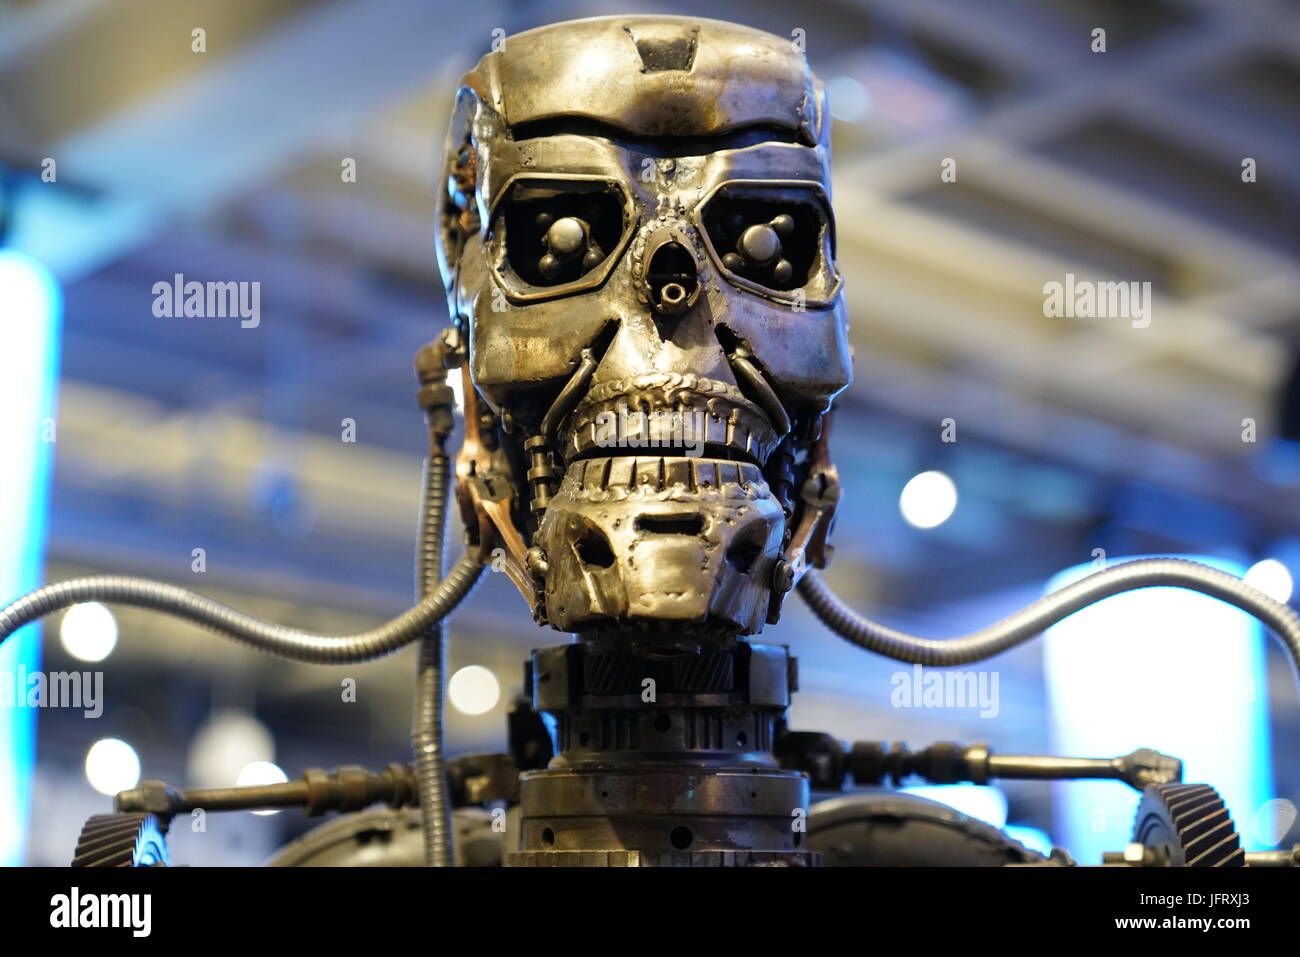 Los Angeles, California, USA - JUNE 25, 2017: Cyberdyne Systems Model 101 Series T-800 Terminator metal endoskeleton in the souvenirs gift shop Stock Photo